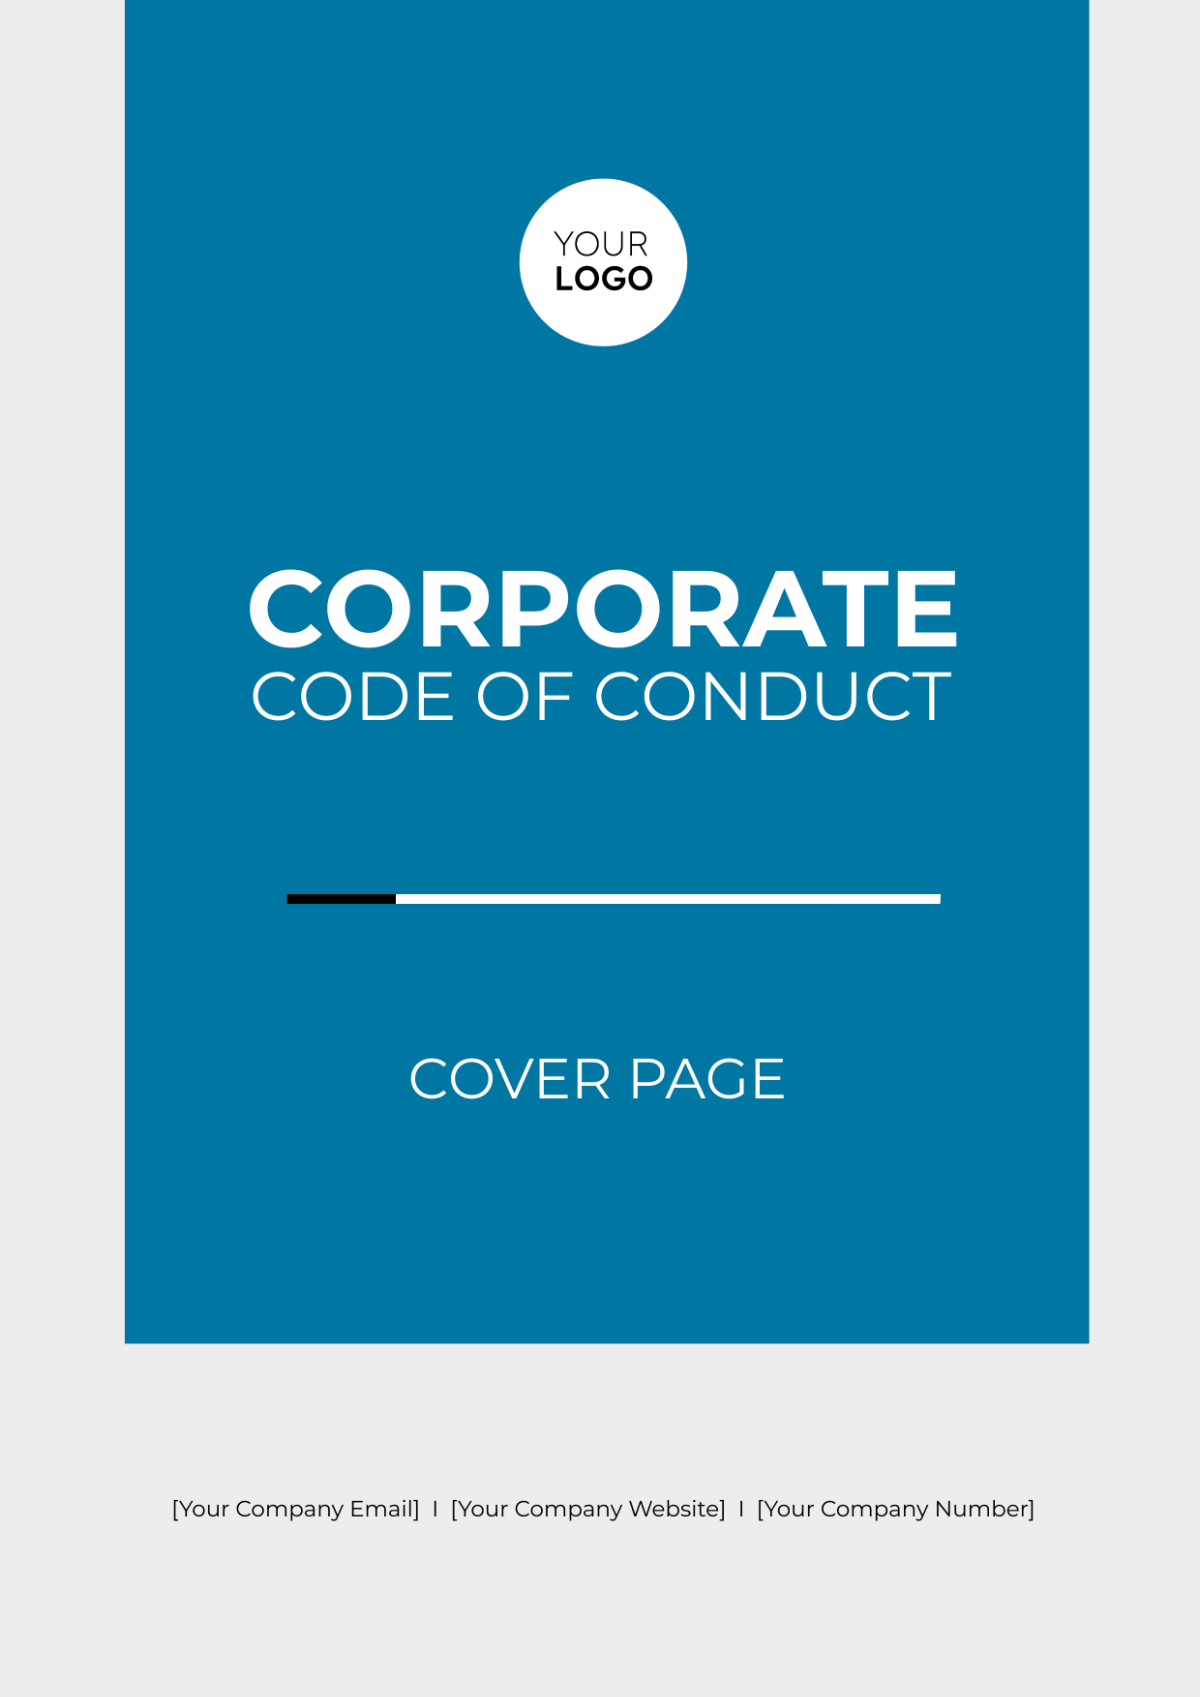 Free Code of Conduct Corporate Cover Page Template